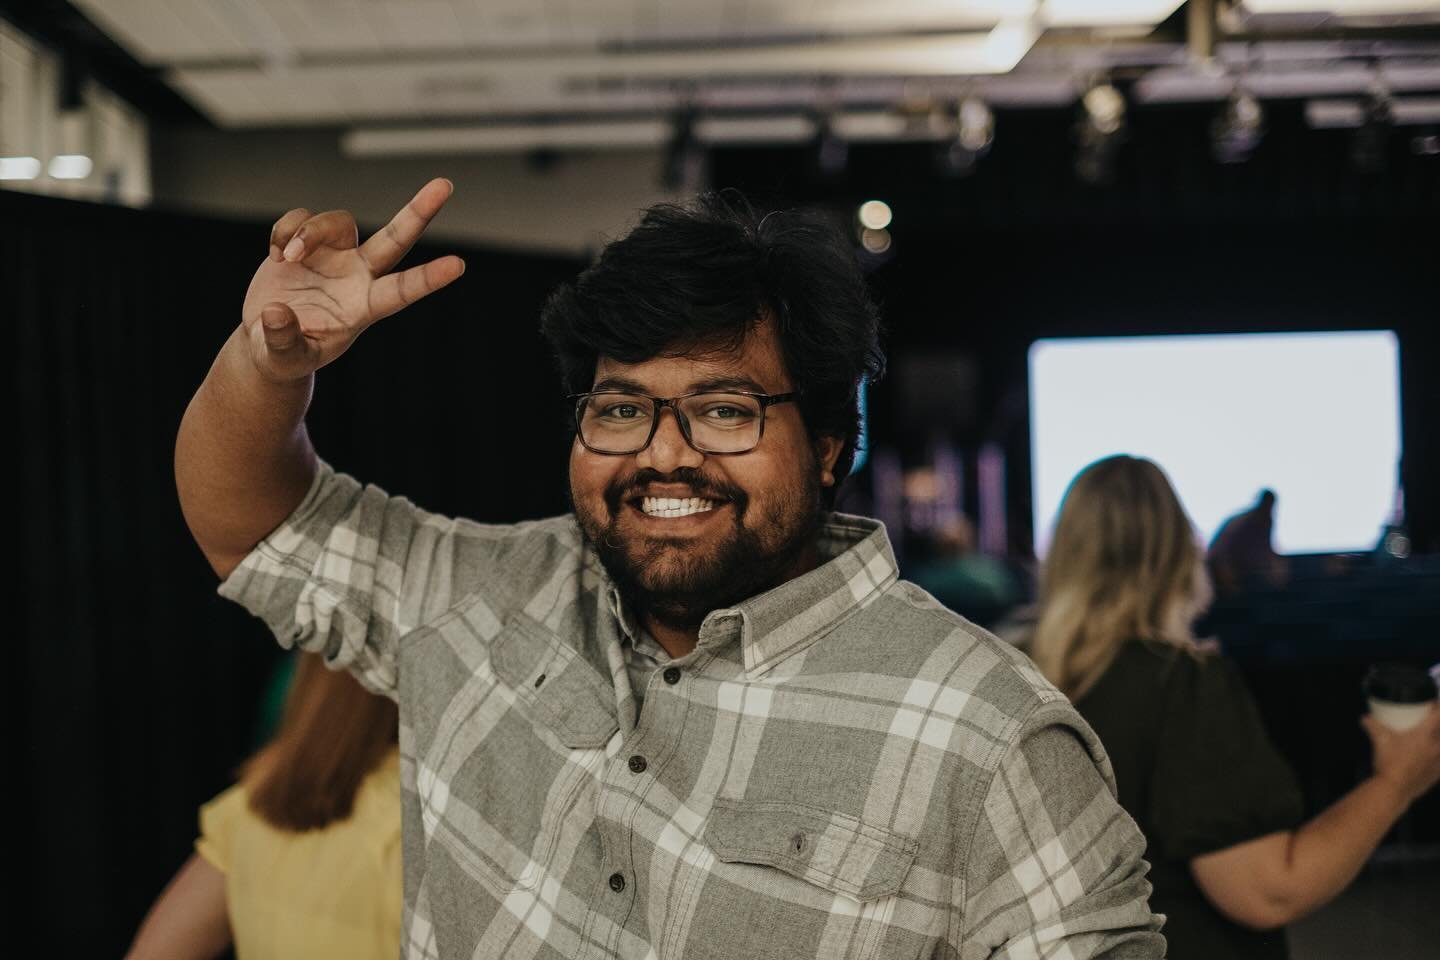 We love our church family, and we love to celebrate them! This is Isaac &mdash; a guy who always brings a smile and good vibes wherever he goes!

You&rsquo;re a legend Isaac!